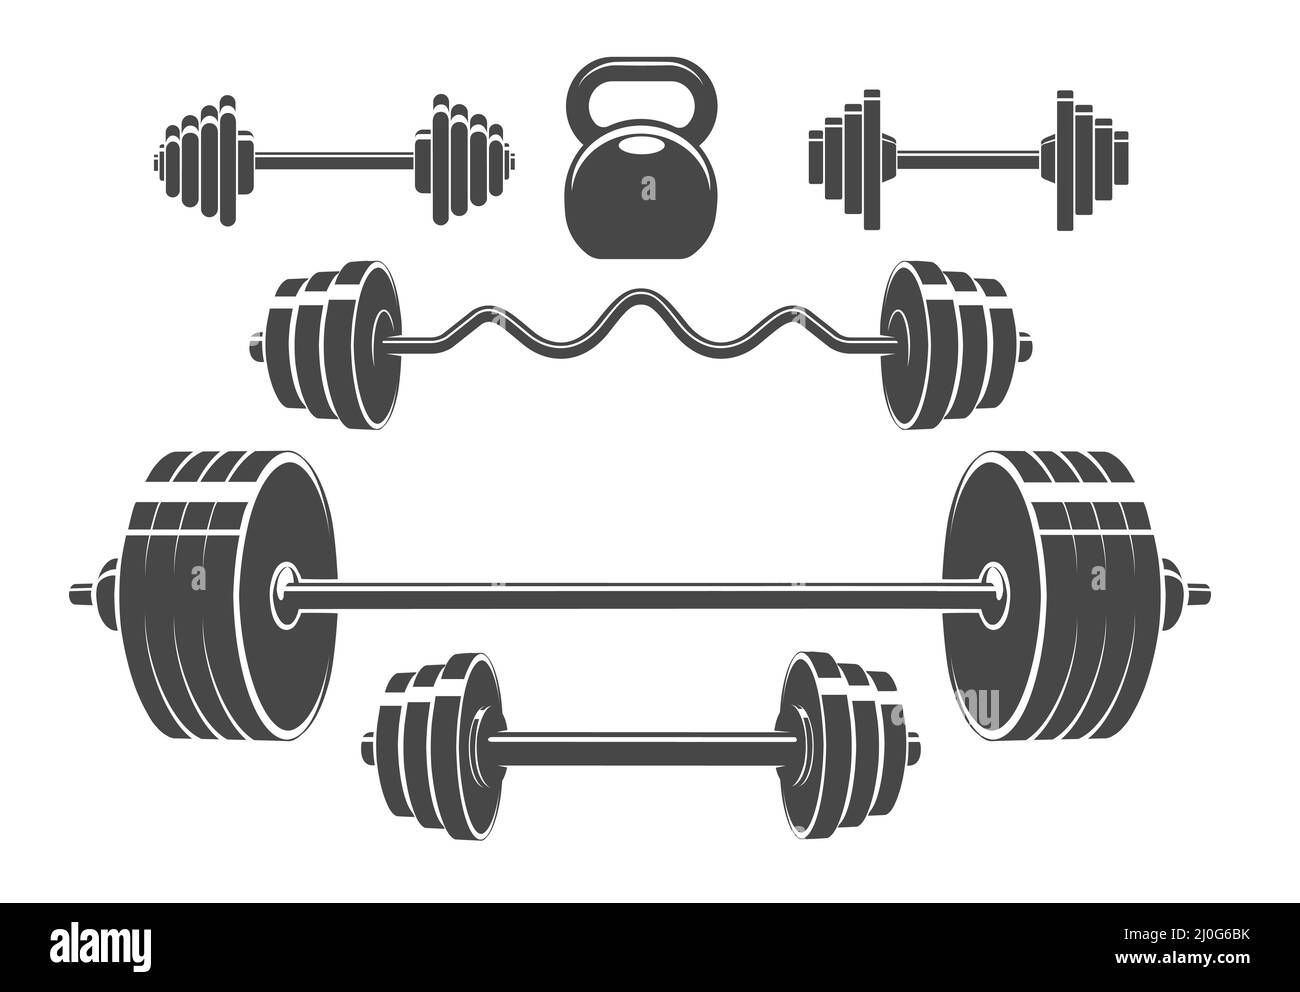 Set of sport weights for bodybuilding, fitness and weightlifting isolated on white background Stock Vector